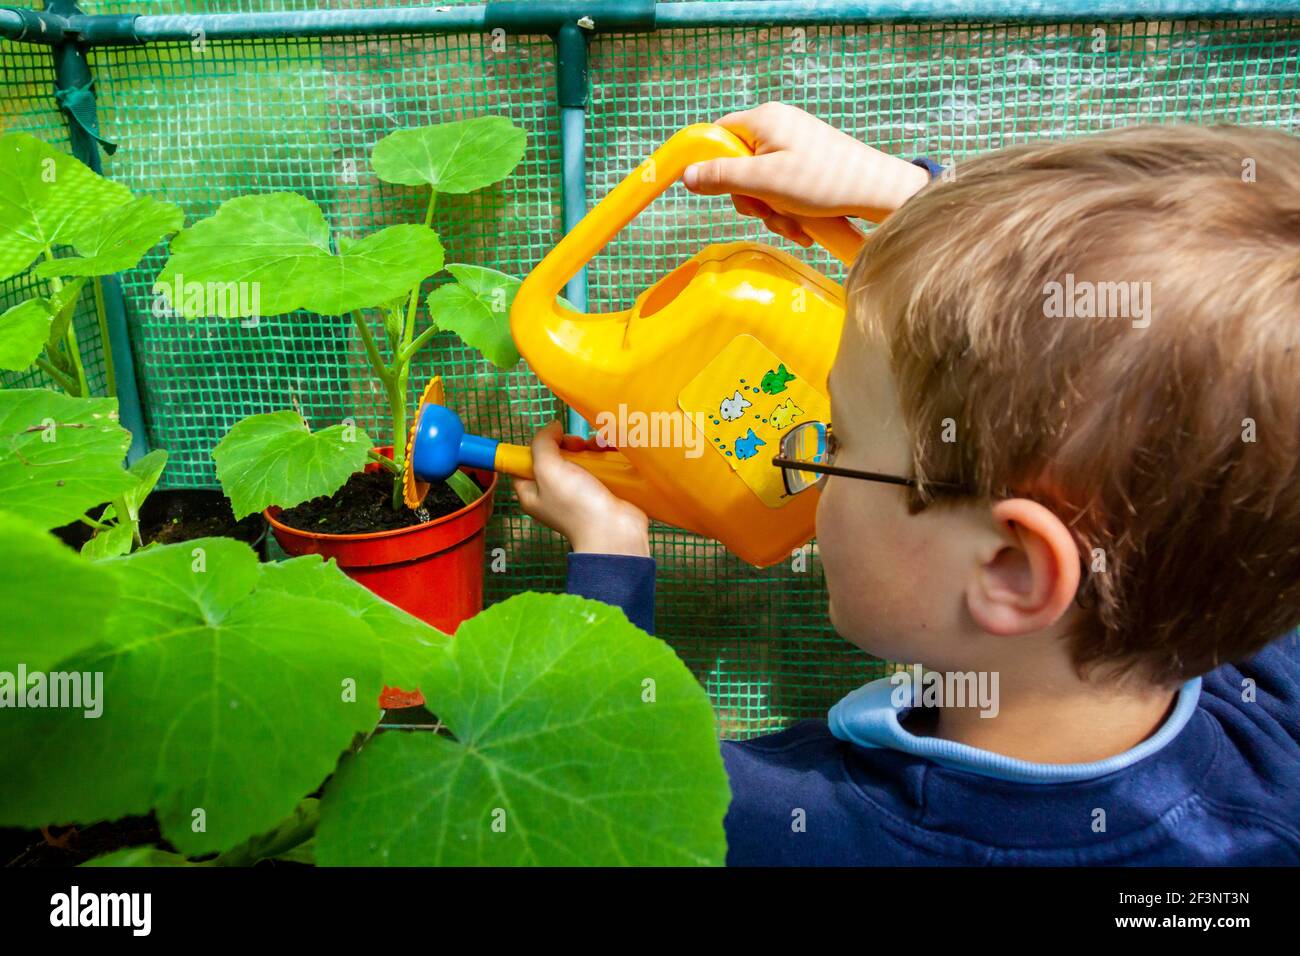 Primary school child using a plastic watering can to water a plant in the school garden. Stock Photo